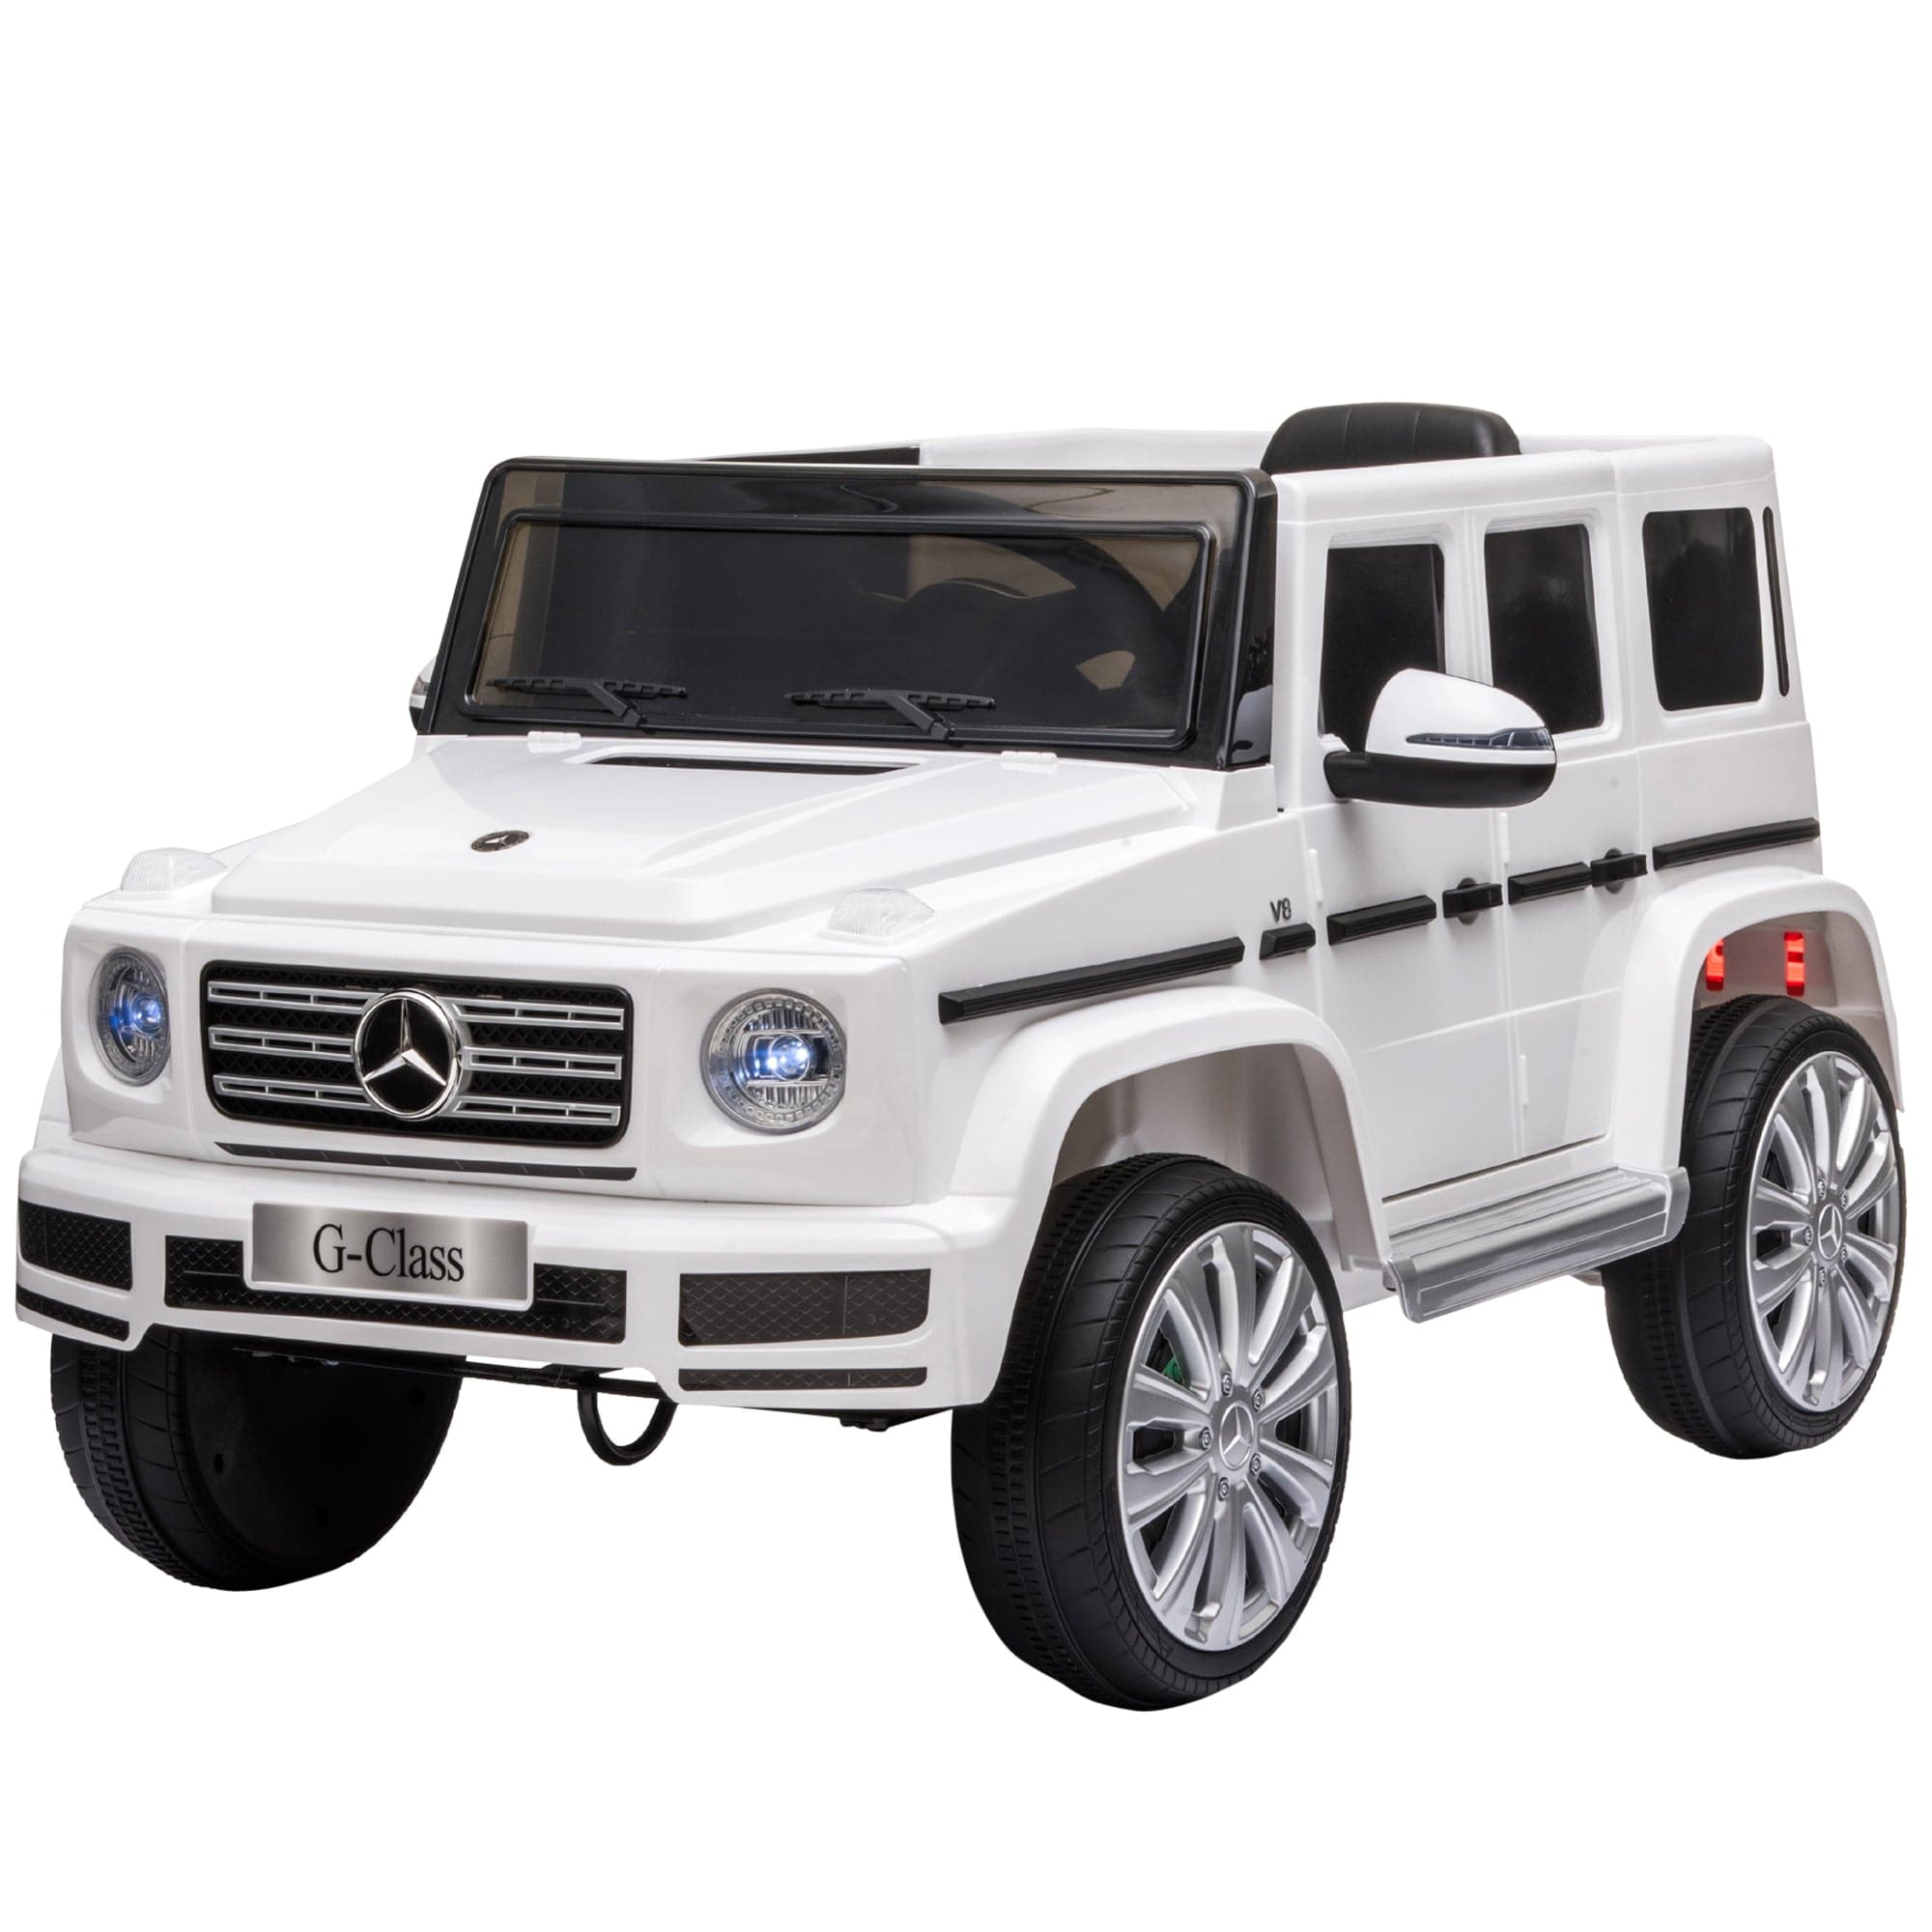 HOMCOM Mercedes Benz G500 12V Electric Kids Ride On Toy Car with Remote Control, Music, Lights & Suspension for 3-8 Years (White)